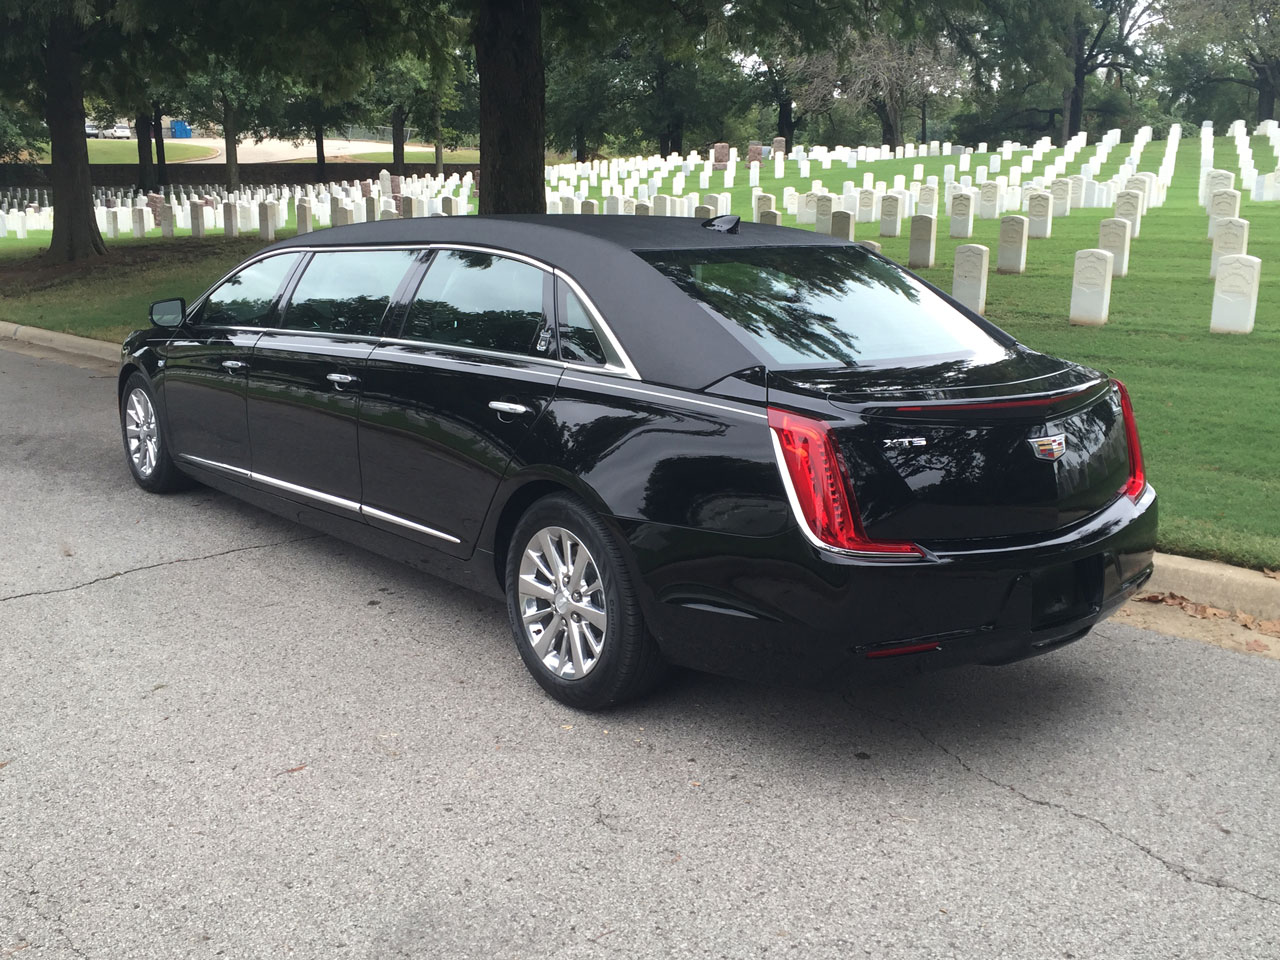 2019 Armbruster Stageway Cadillac L6 52 Stretch Limousine 5